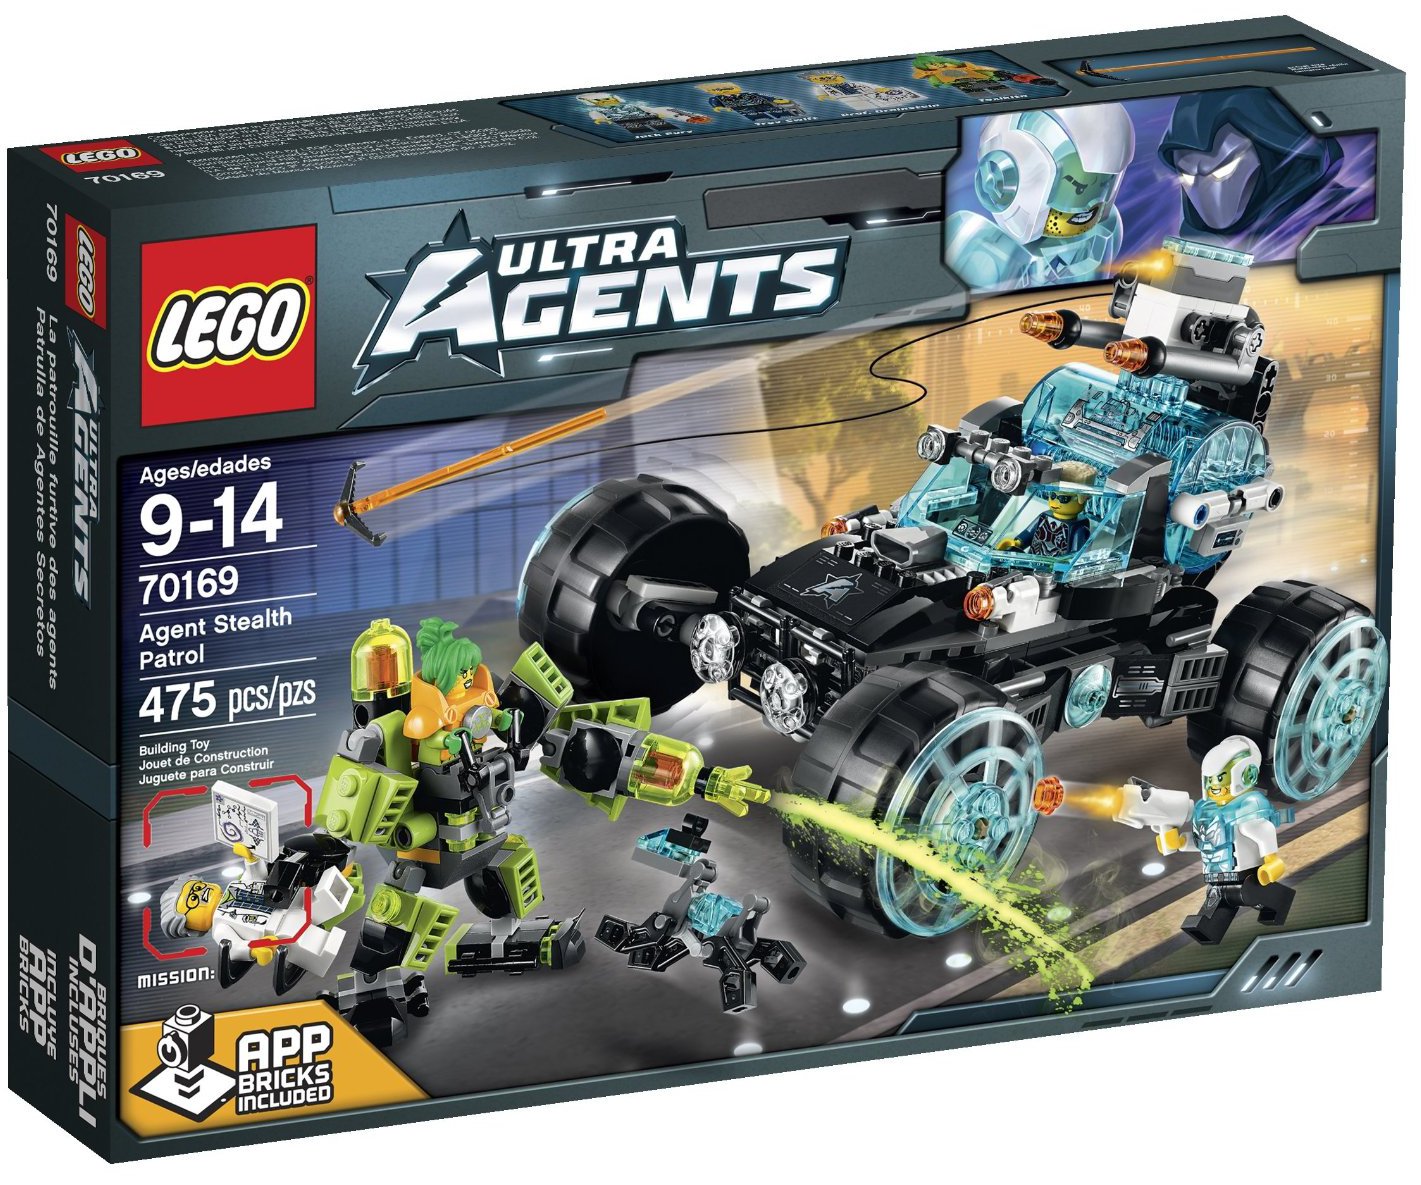 2015 LEGO Sets Released Online Photos! Bricks and Bloks